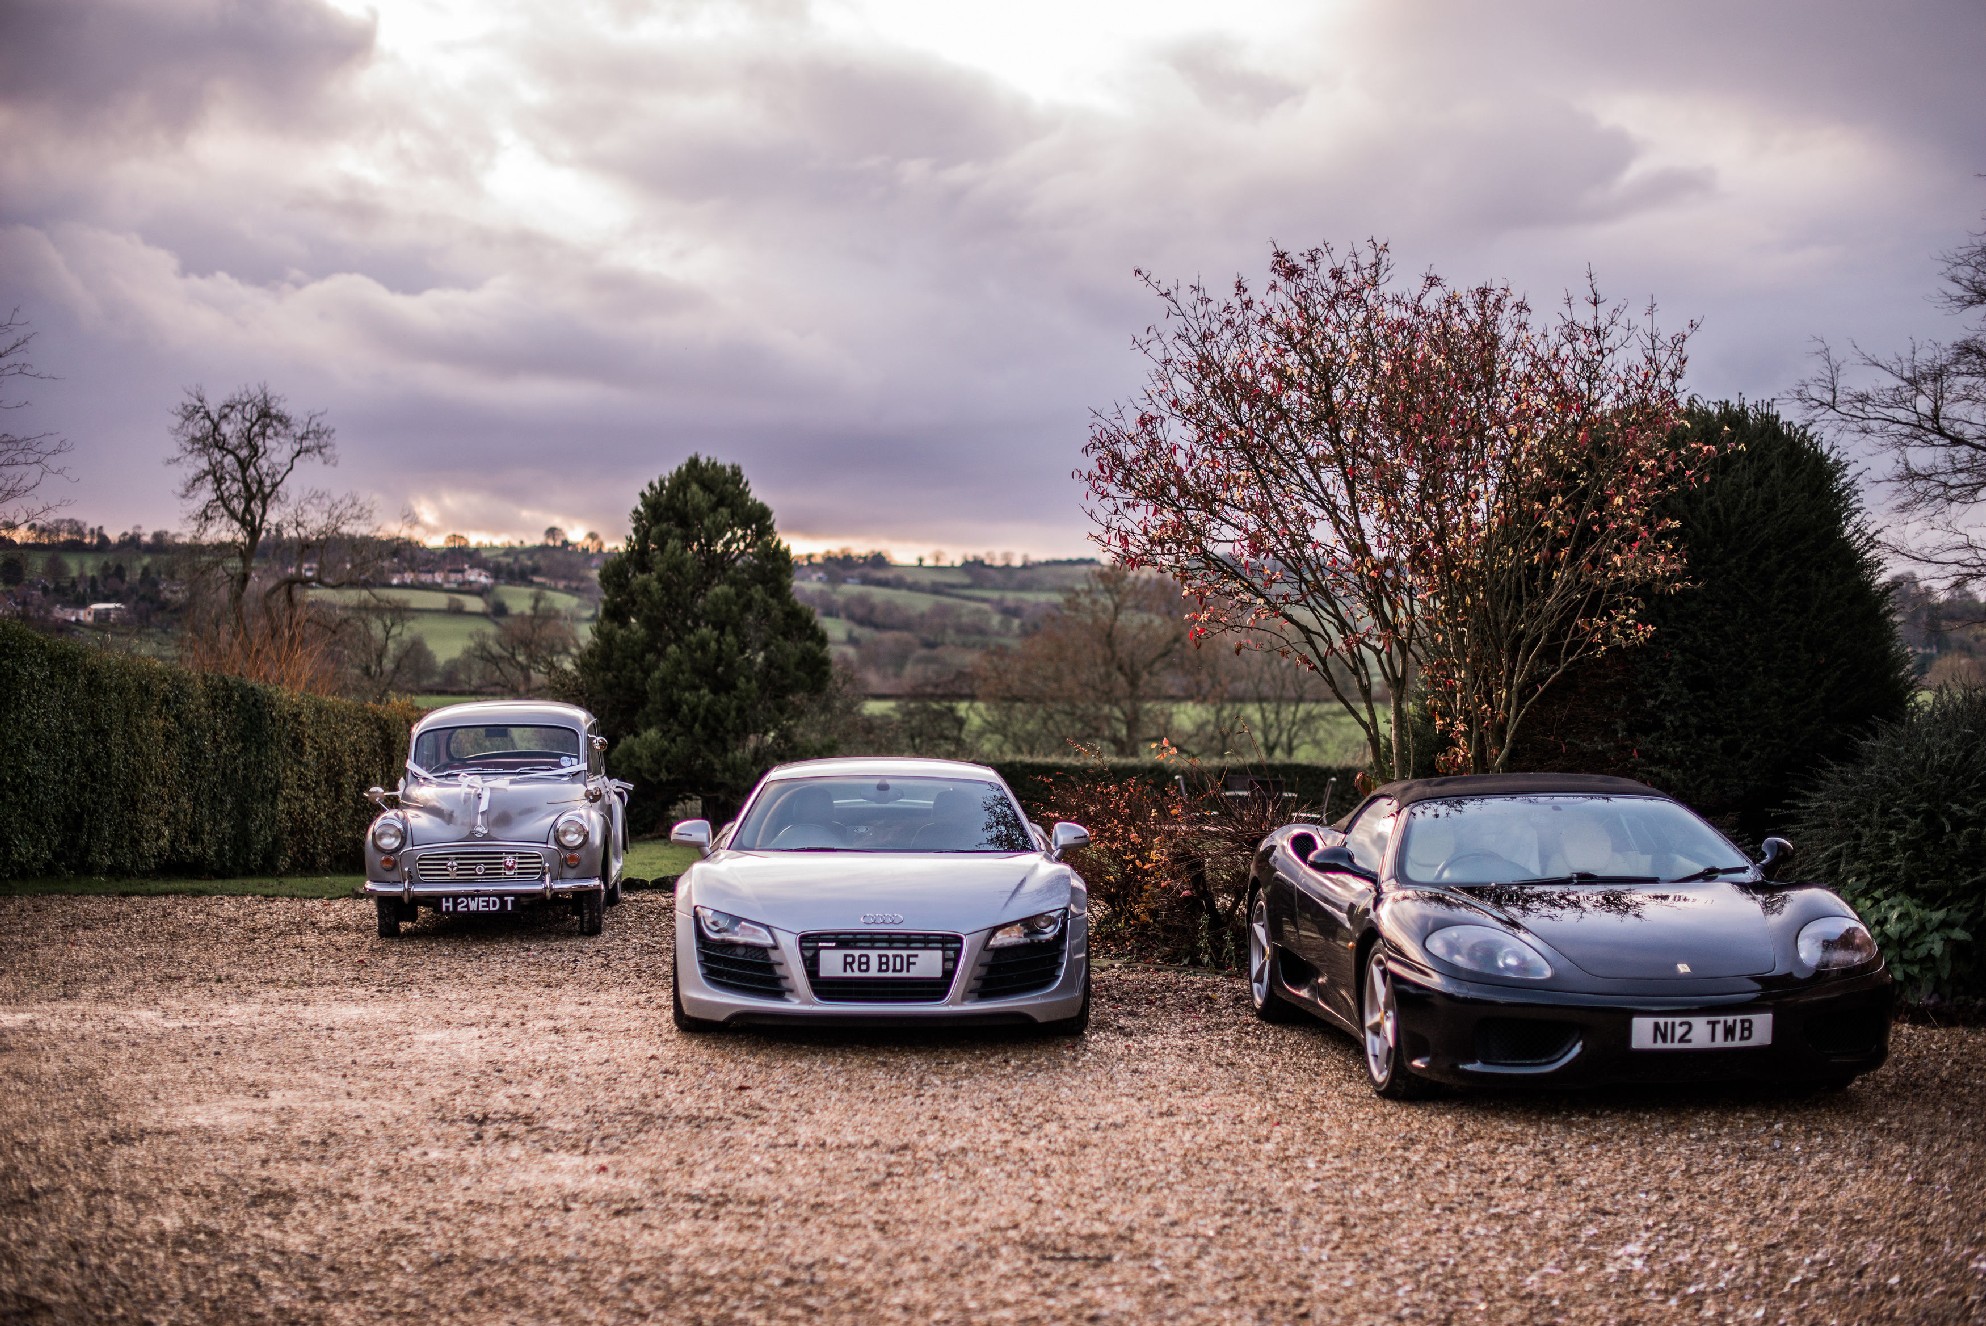 A grey classic wedding car parked next to two expensive sports cars - a grey Audi and a black Porche.jpg